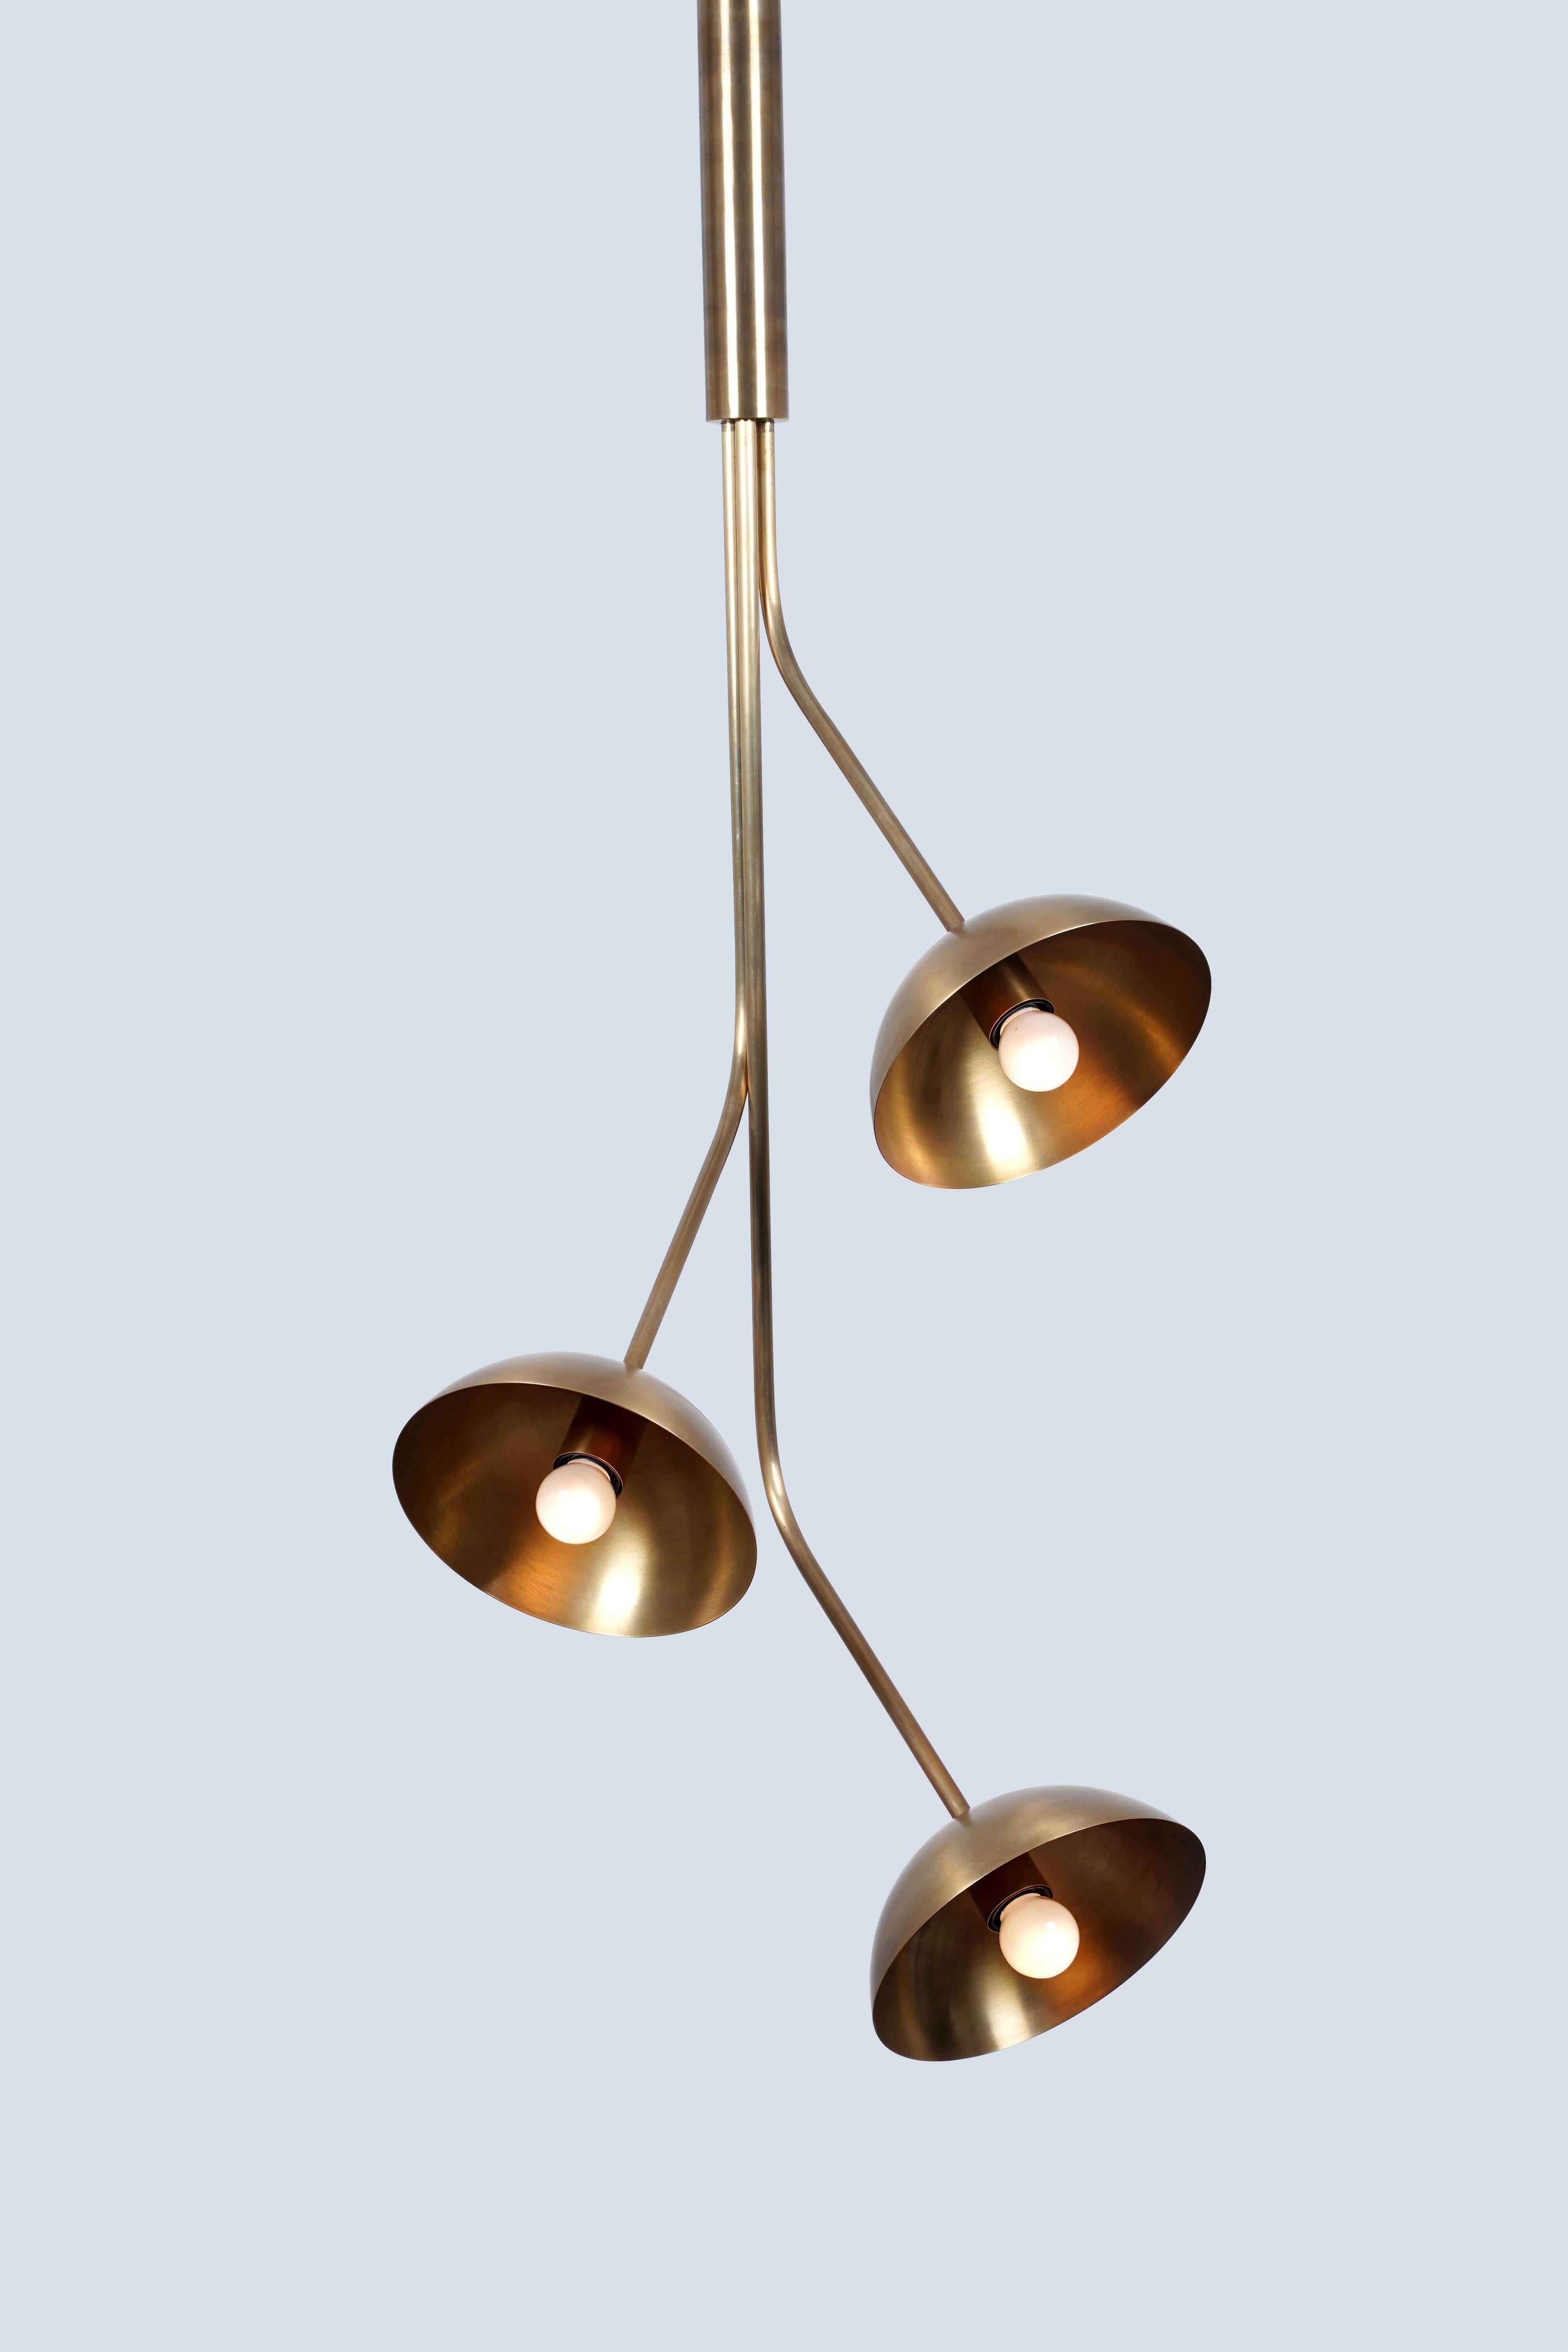 Rhythm 3 Brass Dome Pendant Lamp by Lamp Shaper
Dimensions: D 66 x W 66 x H 135 cm.
Materials: Brass.

Different finishes available: raw brass, aged brass, burnt brass and brushed brass Please contact us.

All our lamps can be wired according to